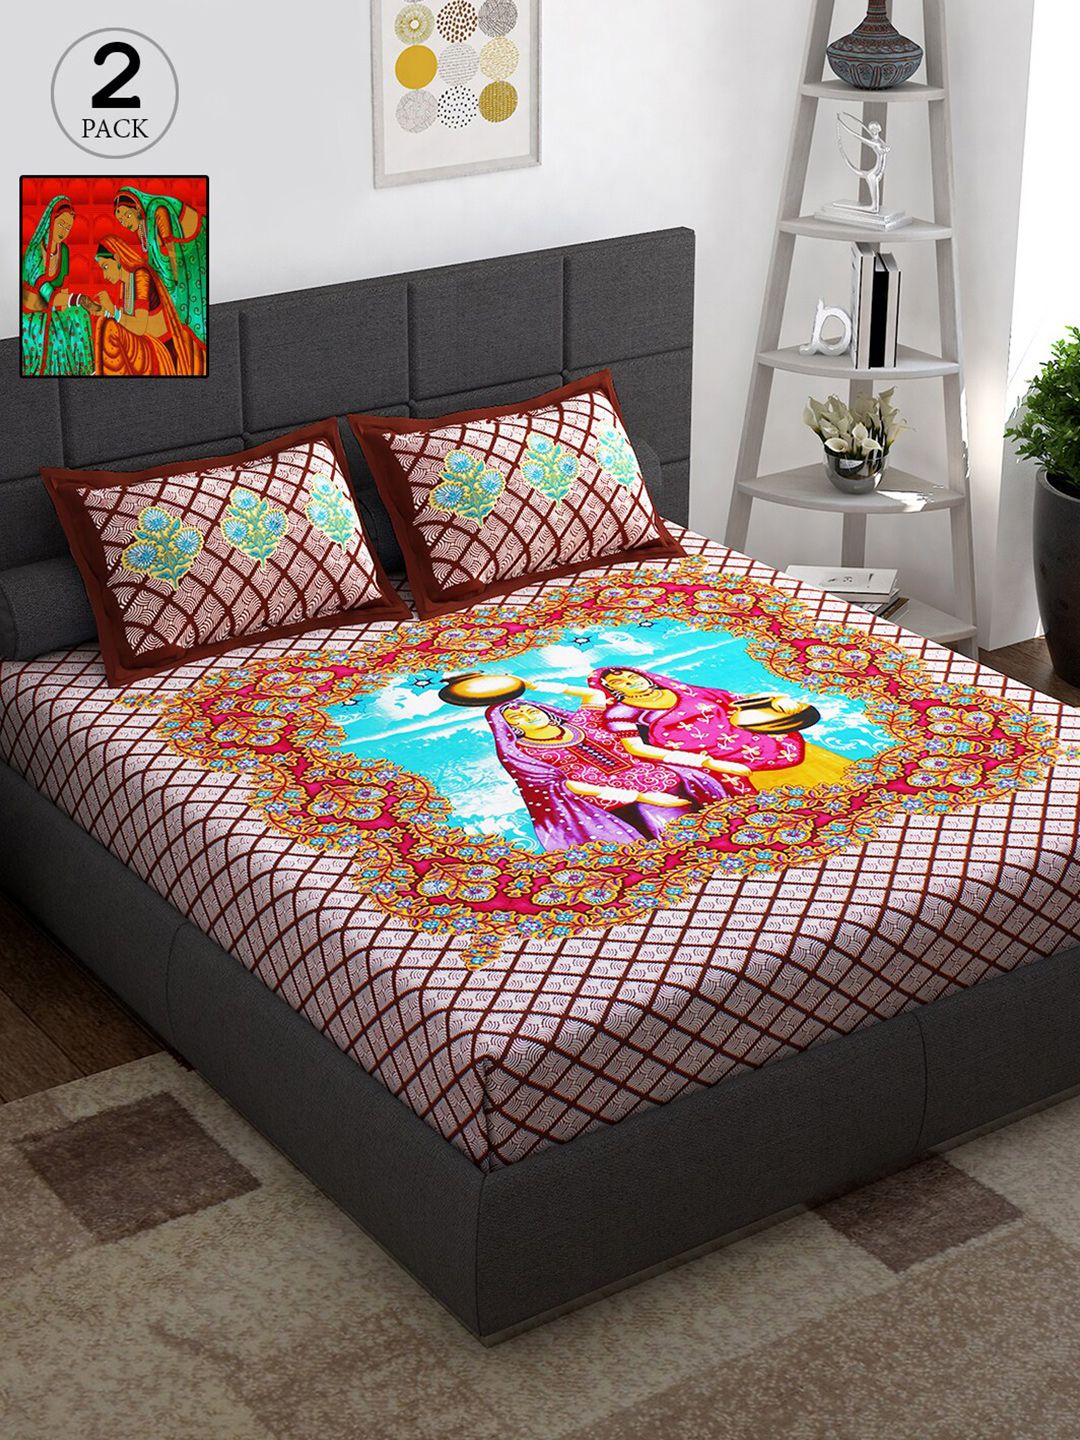 Story@home Multicoloured Ethnic Motifs 152 TC Cotton 2 Queen Bedsheet with 4 Pillow Covers Price in India